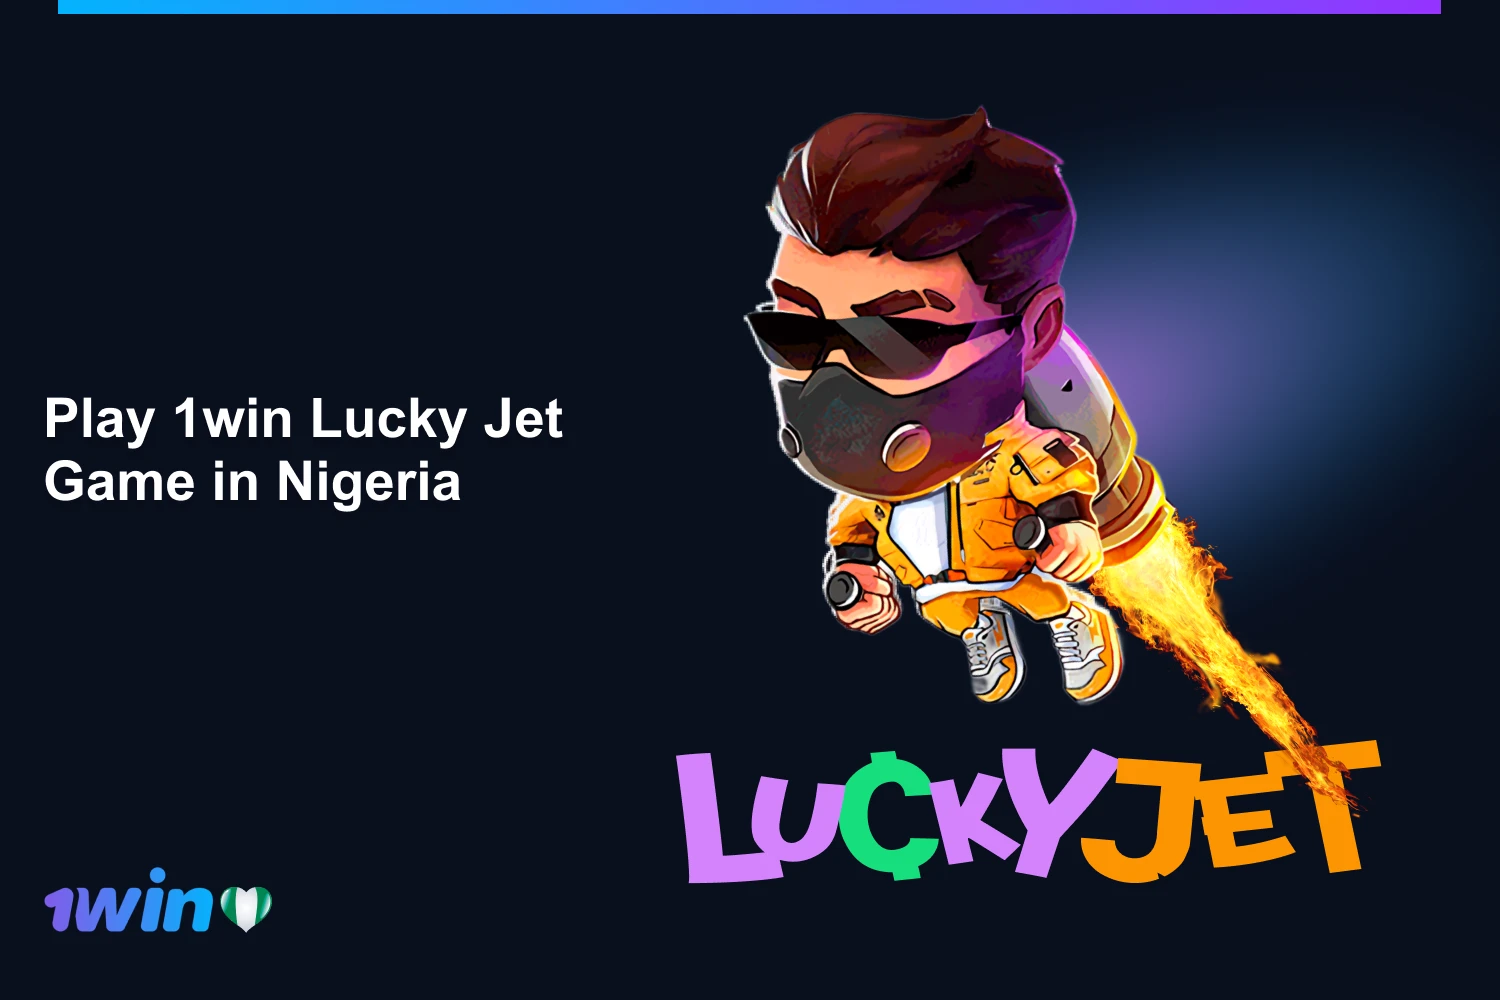 1win Lucky Jet is a simple, fun and potentially lucrative game that Nigerians love to play